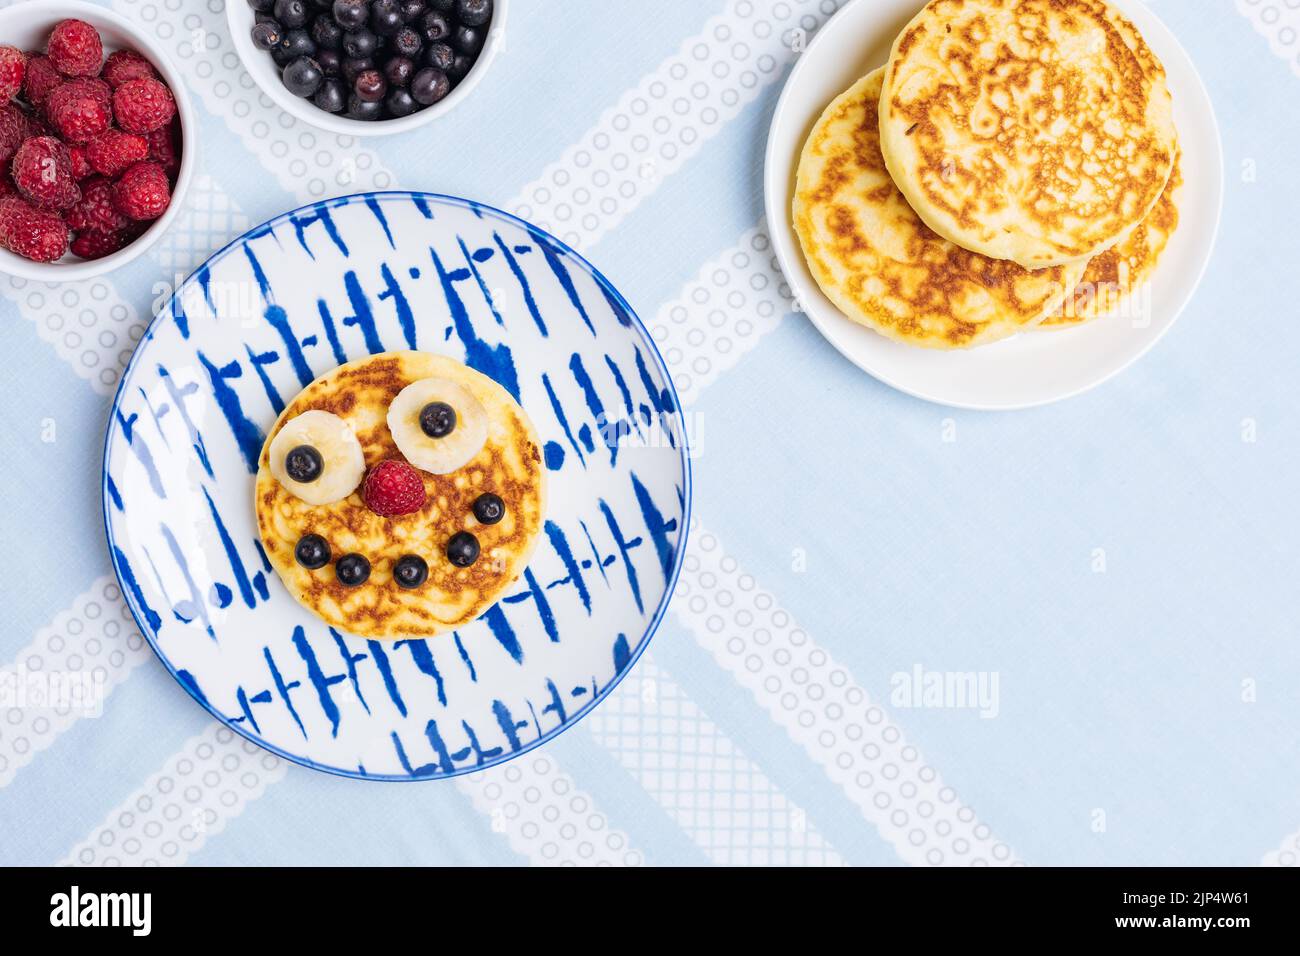 American pancakes decorated like smile and happy faces with raspberries, blueberries and banana. Food for kids, playful and creative. Top view. Stock Photo